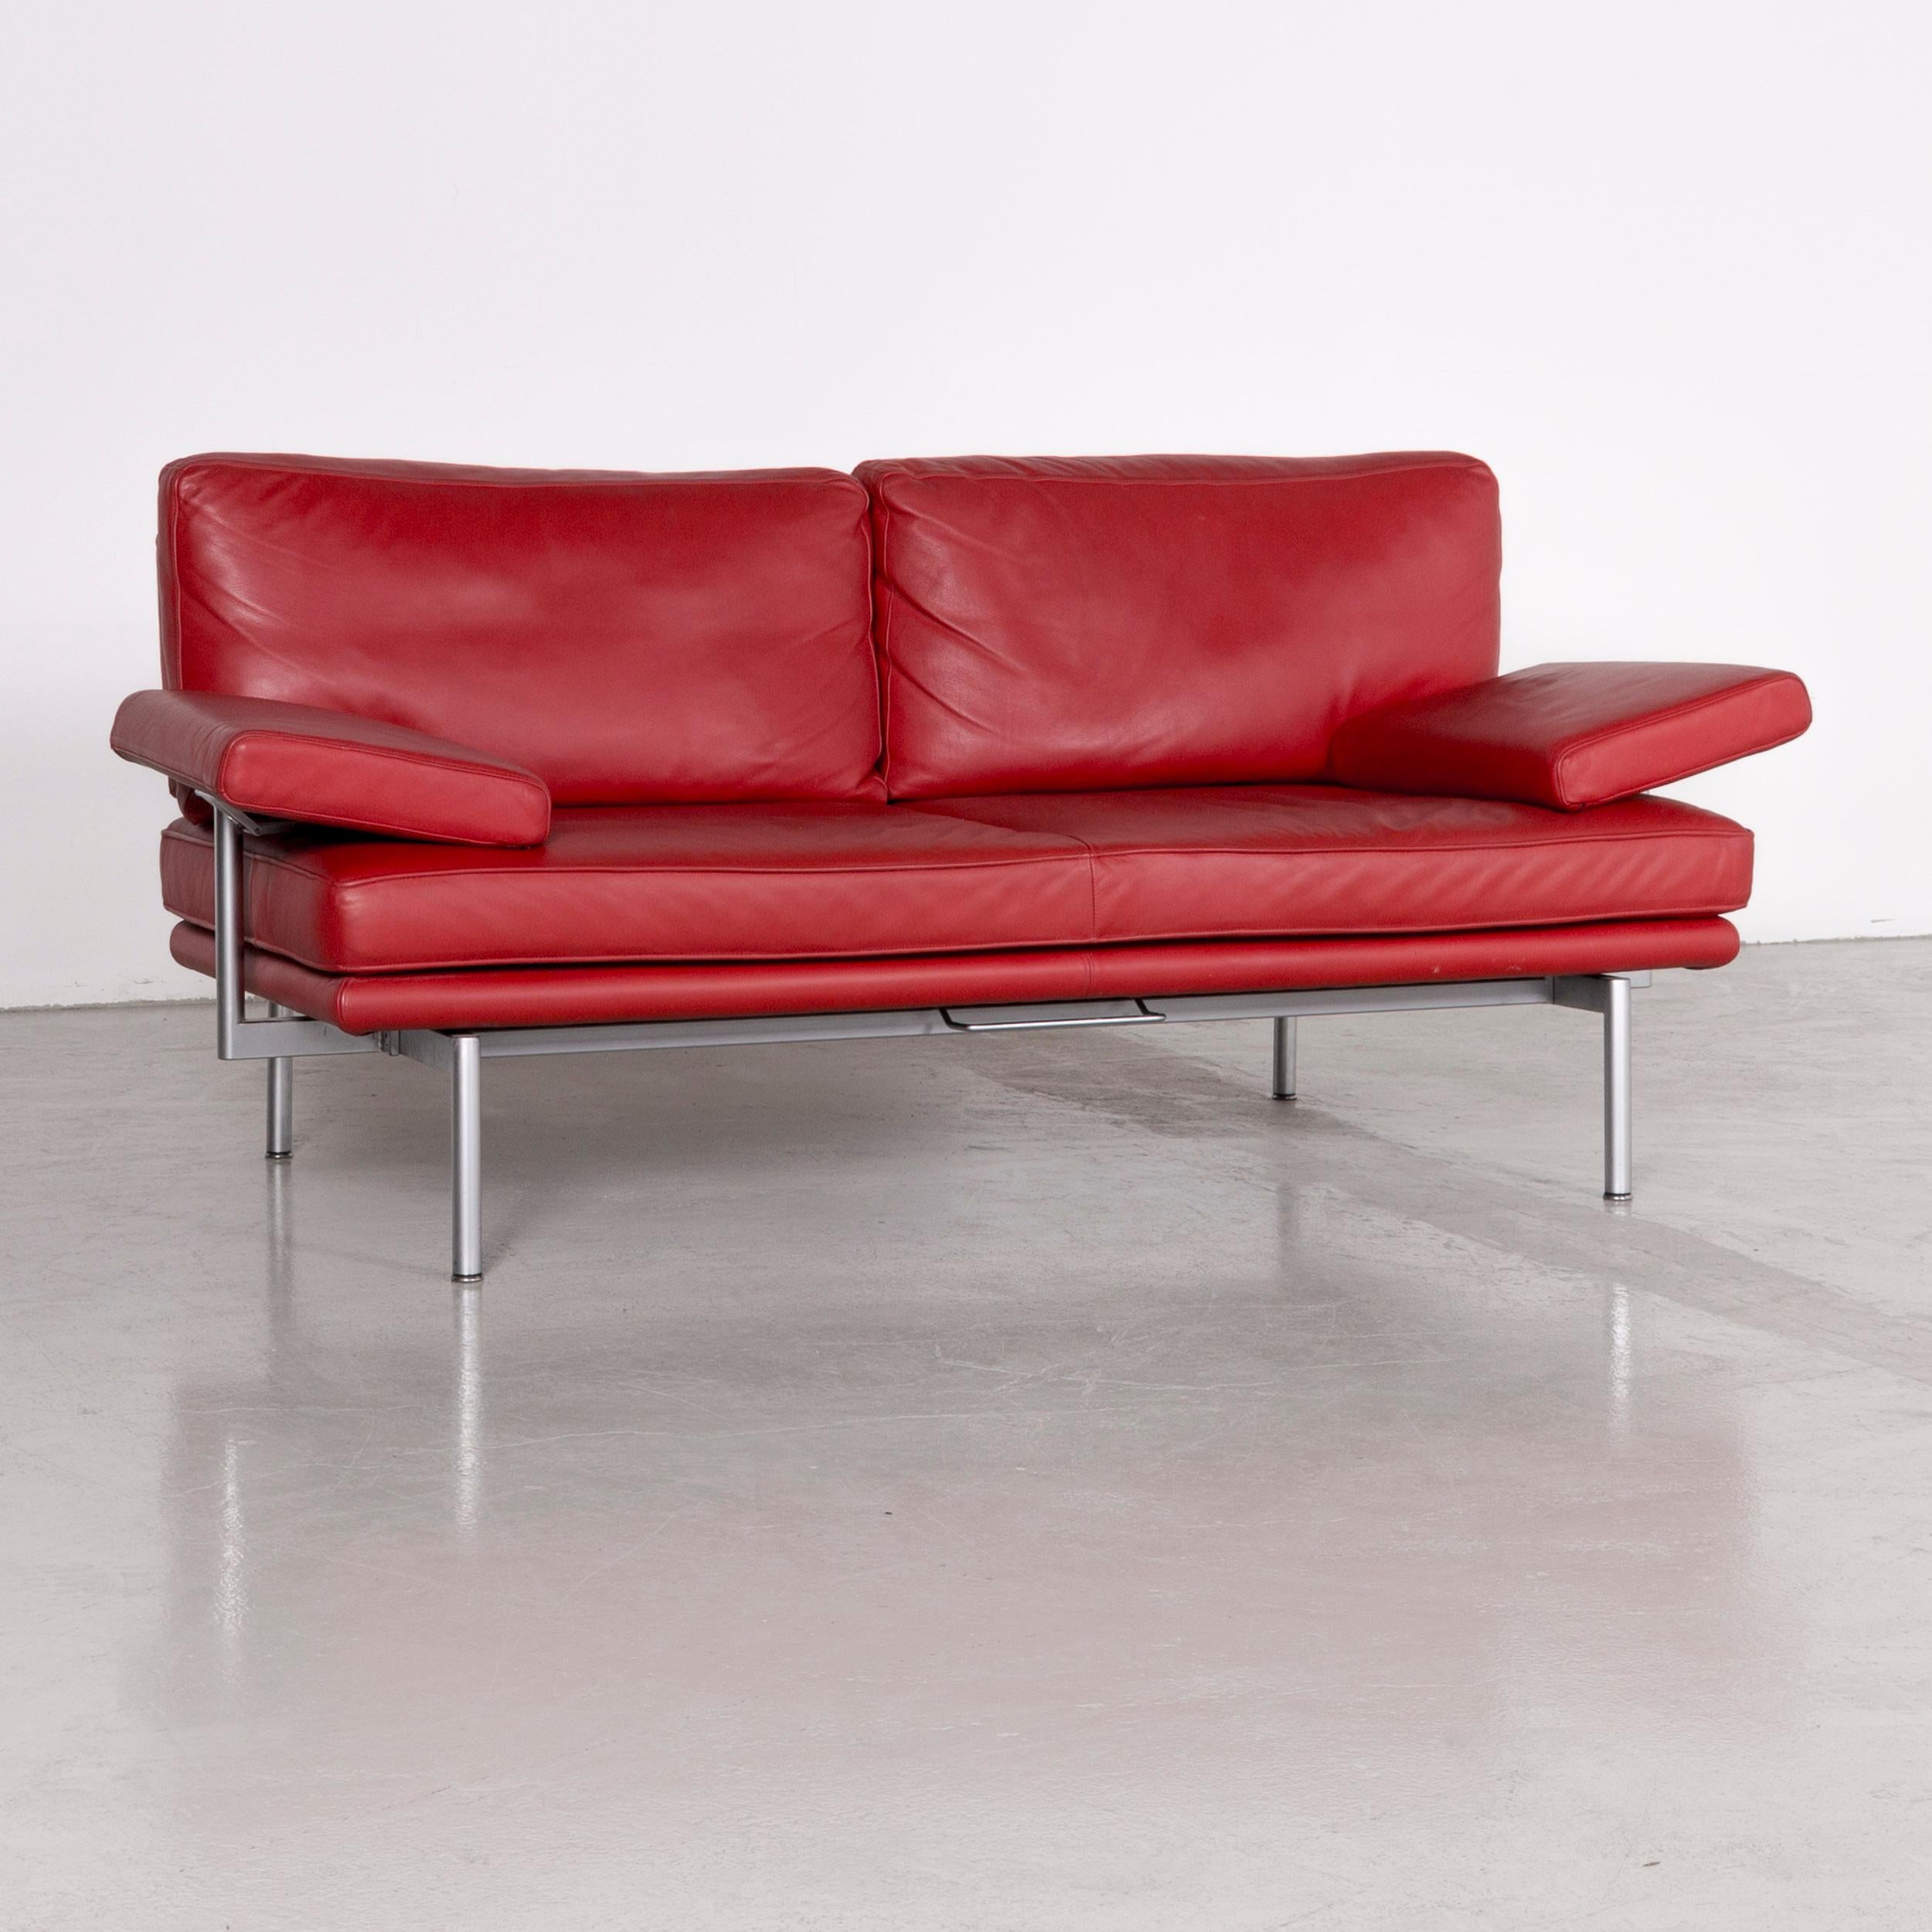 Walter Knoll living platform designer leather couch red by EOOS Design.